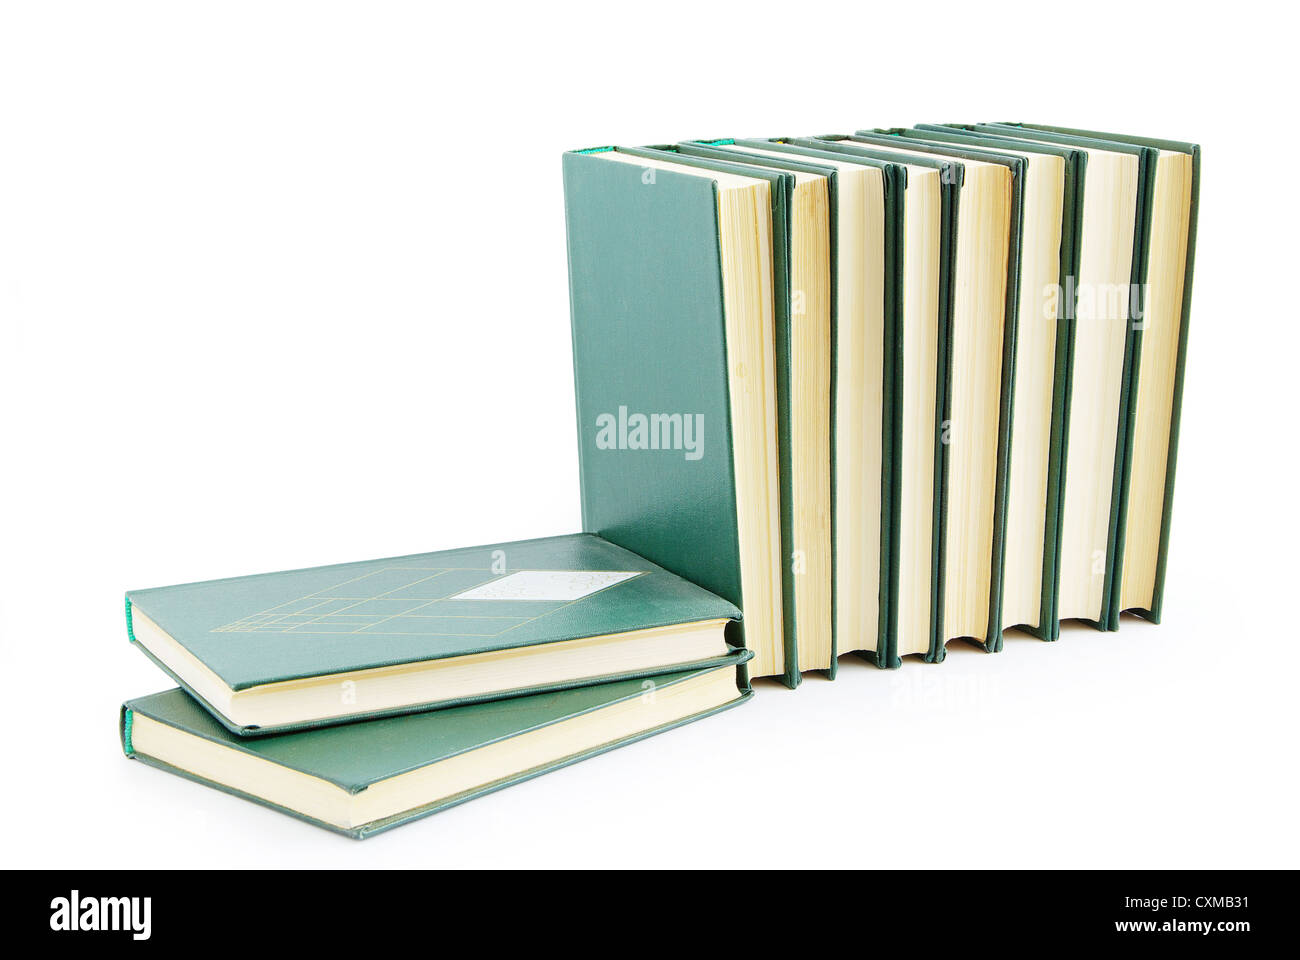 Pile de livres isolated over white background Banque D'Images